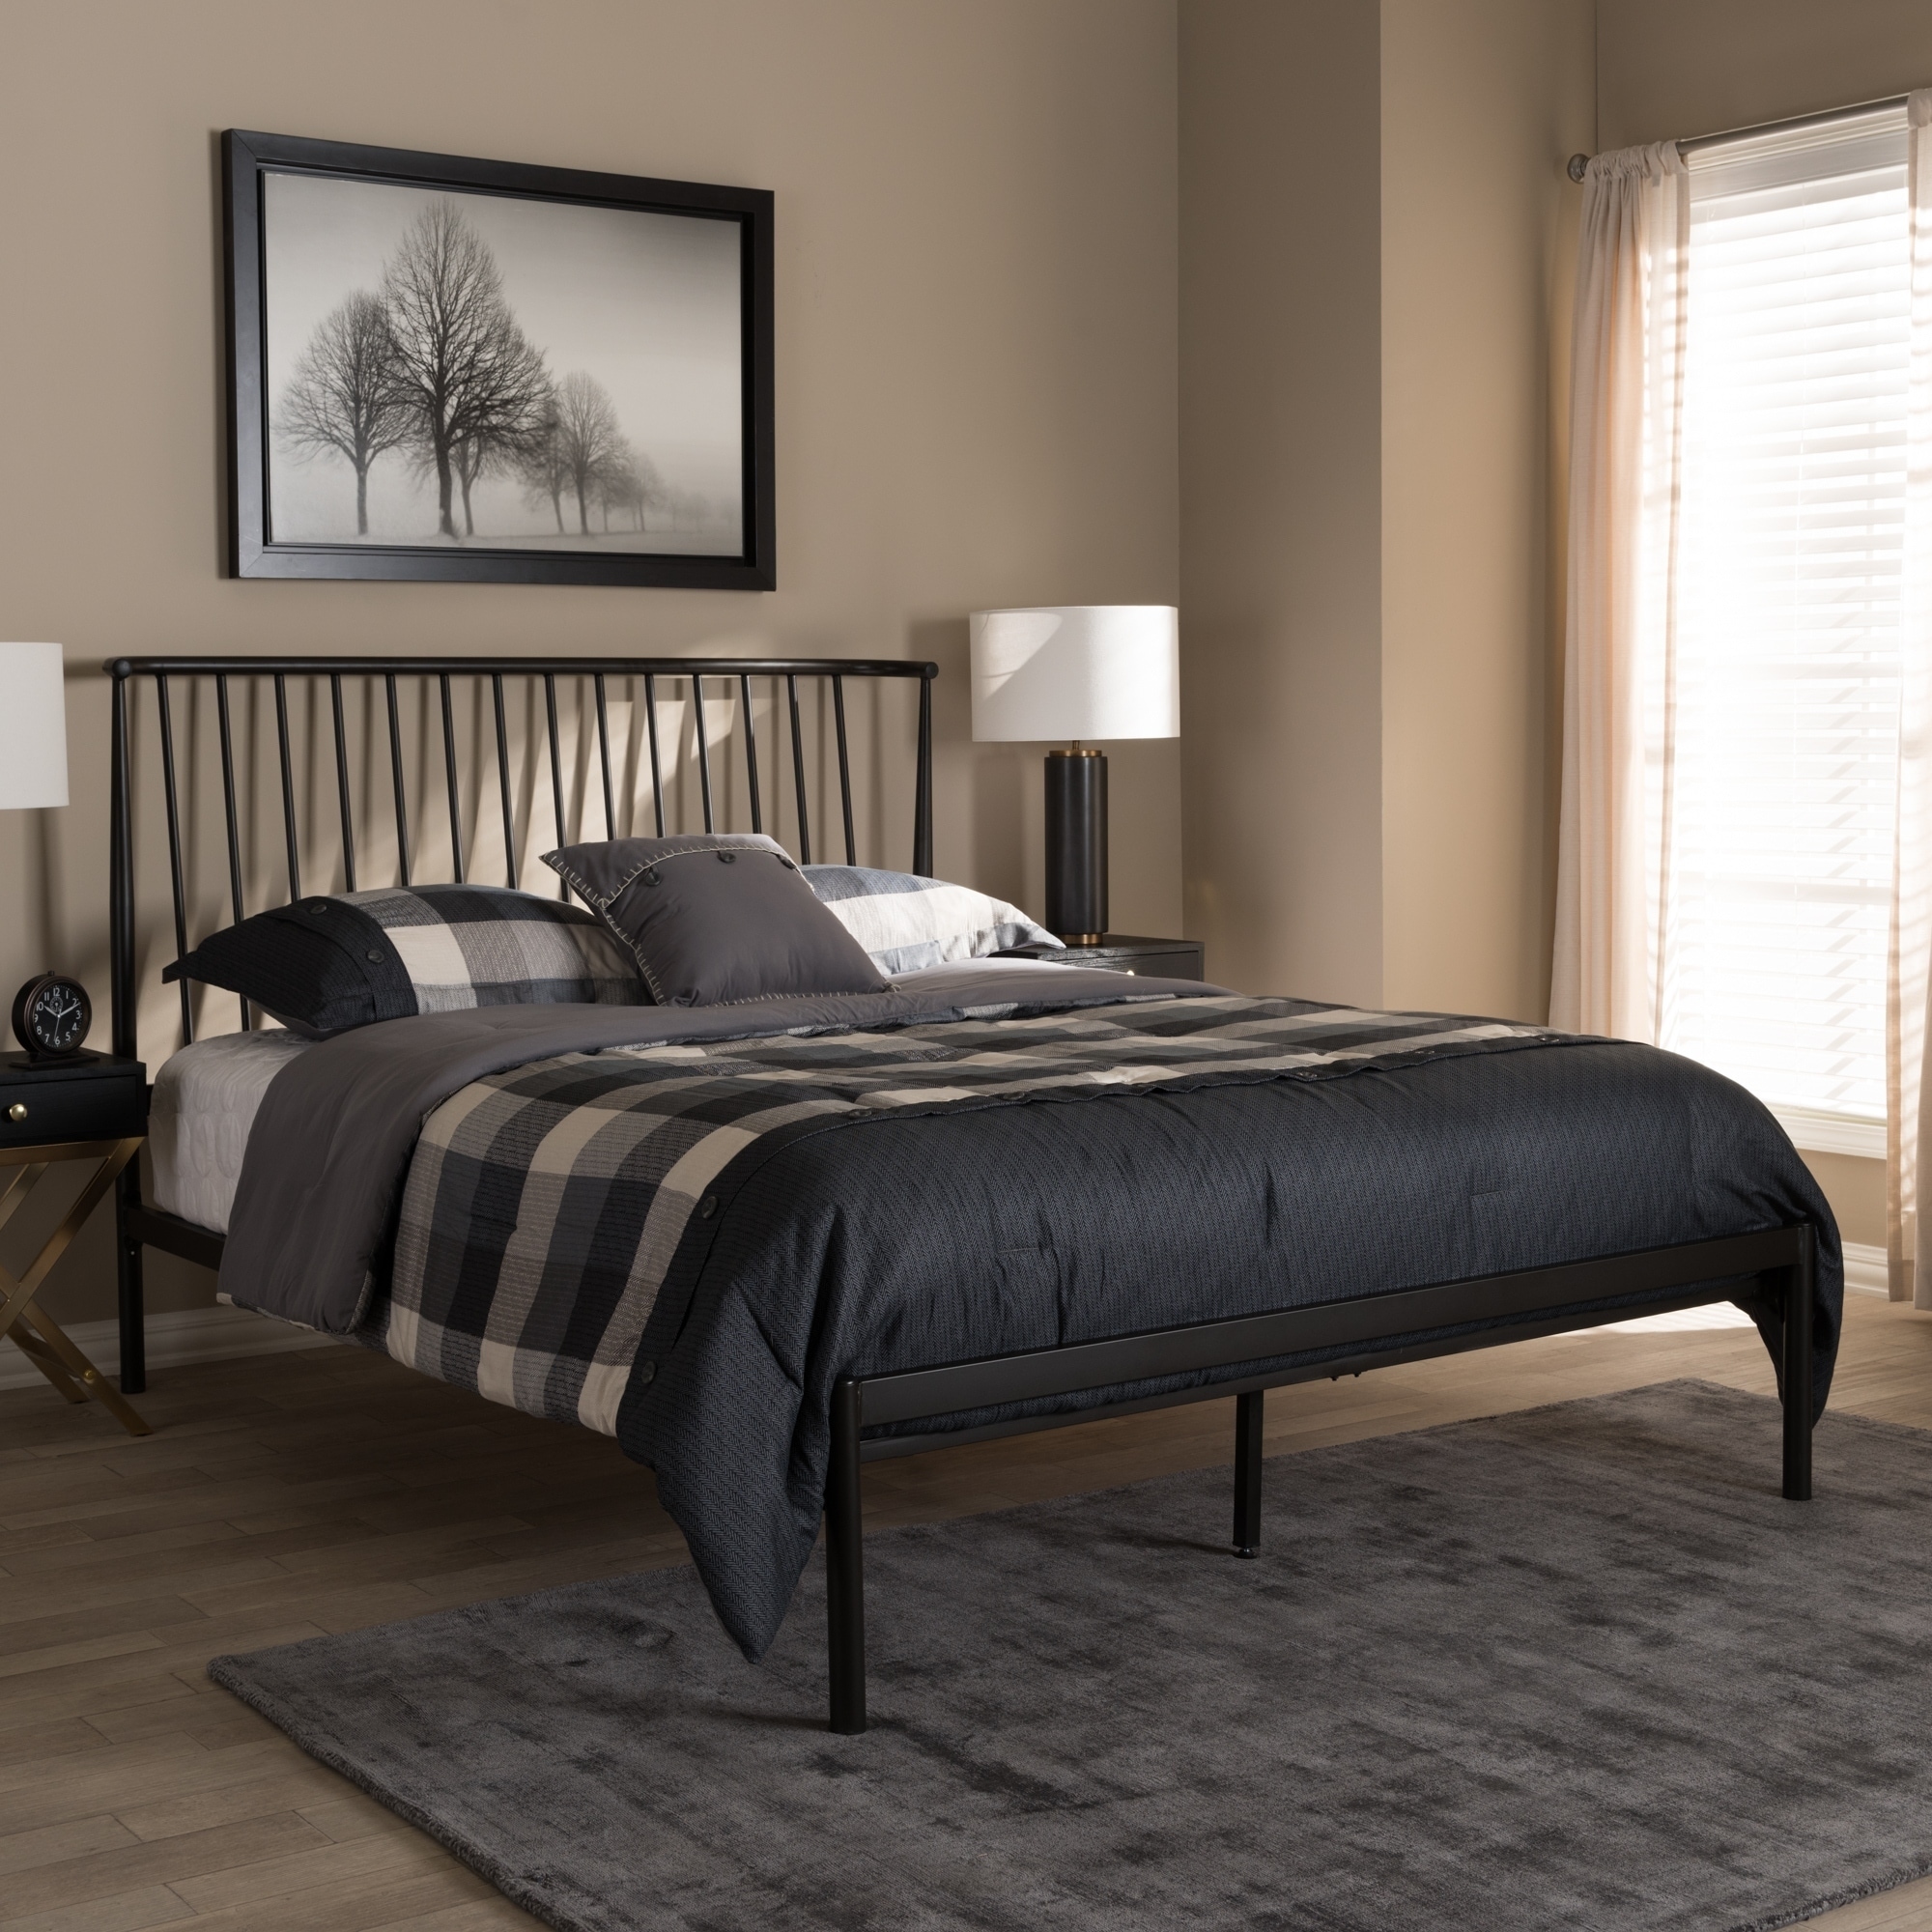 Contemporary Black Finished Metal Platform Bed By Baxton Studio